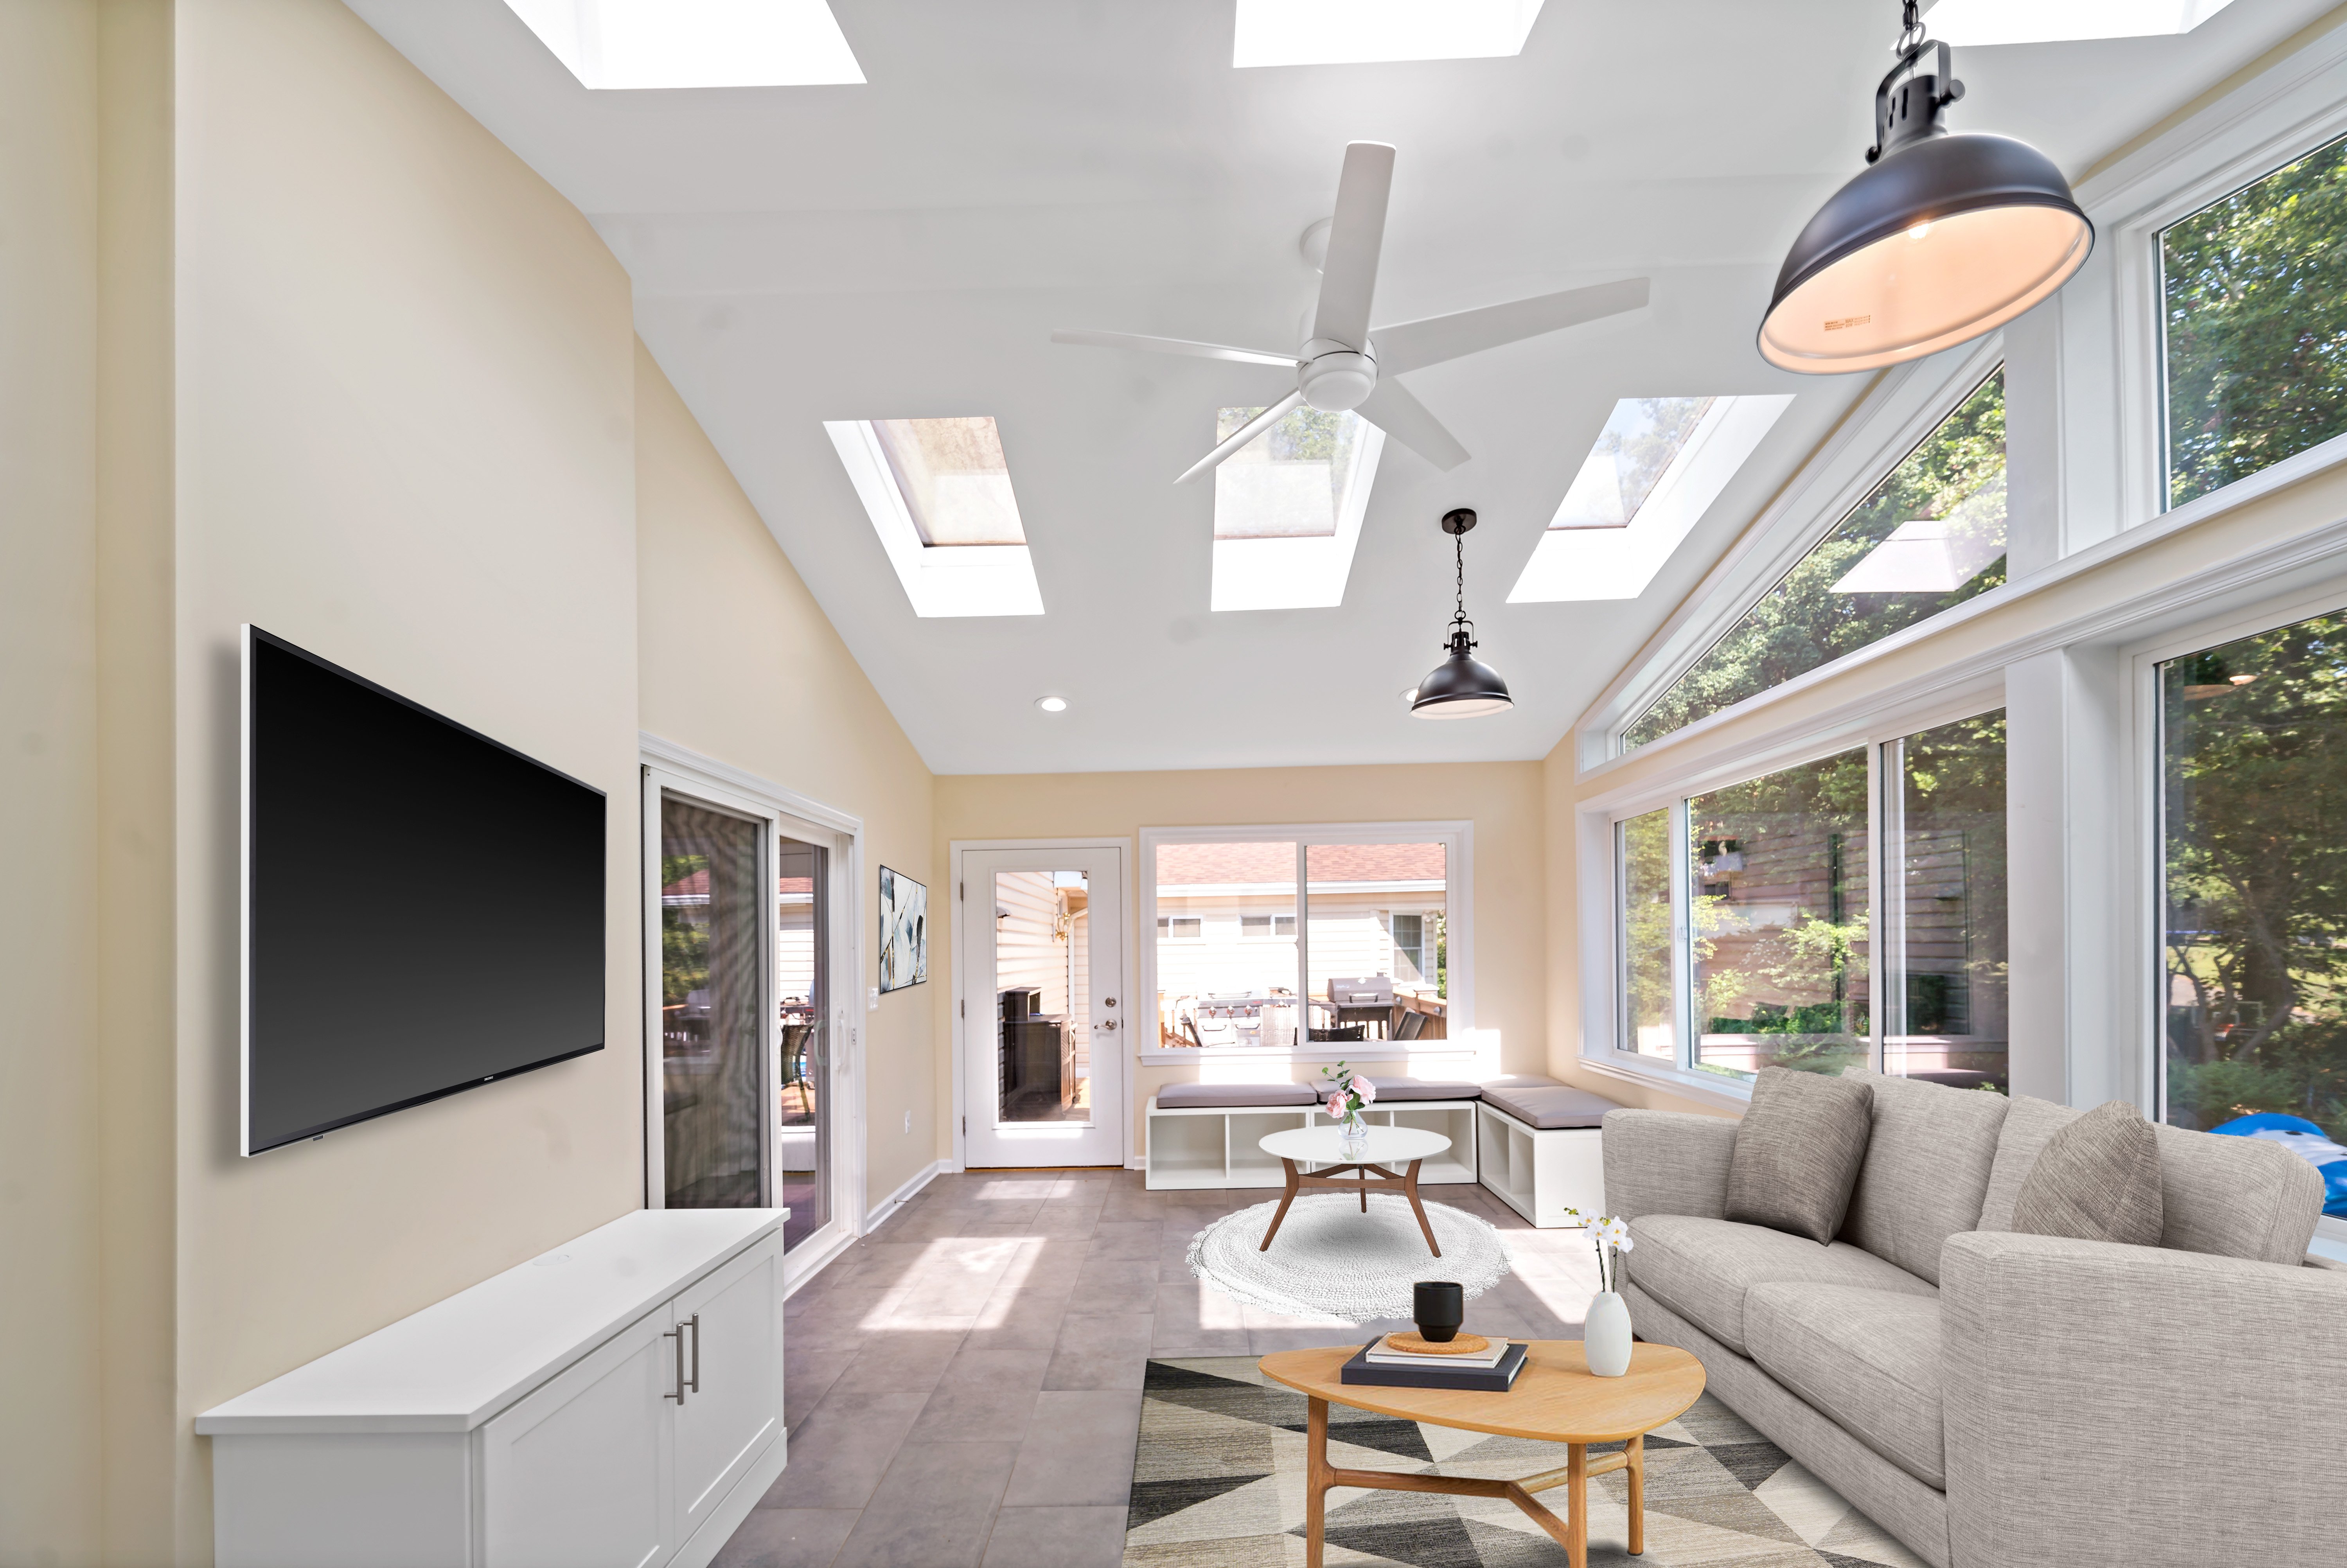 Cathedral ceiling and ceiling fan in sunroom